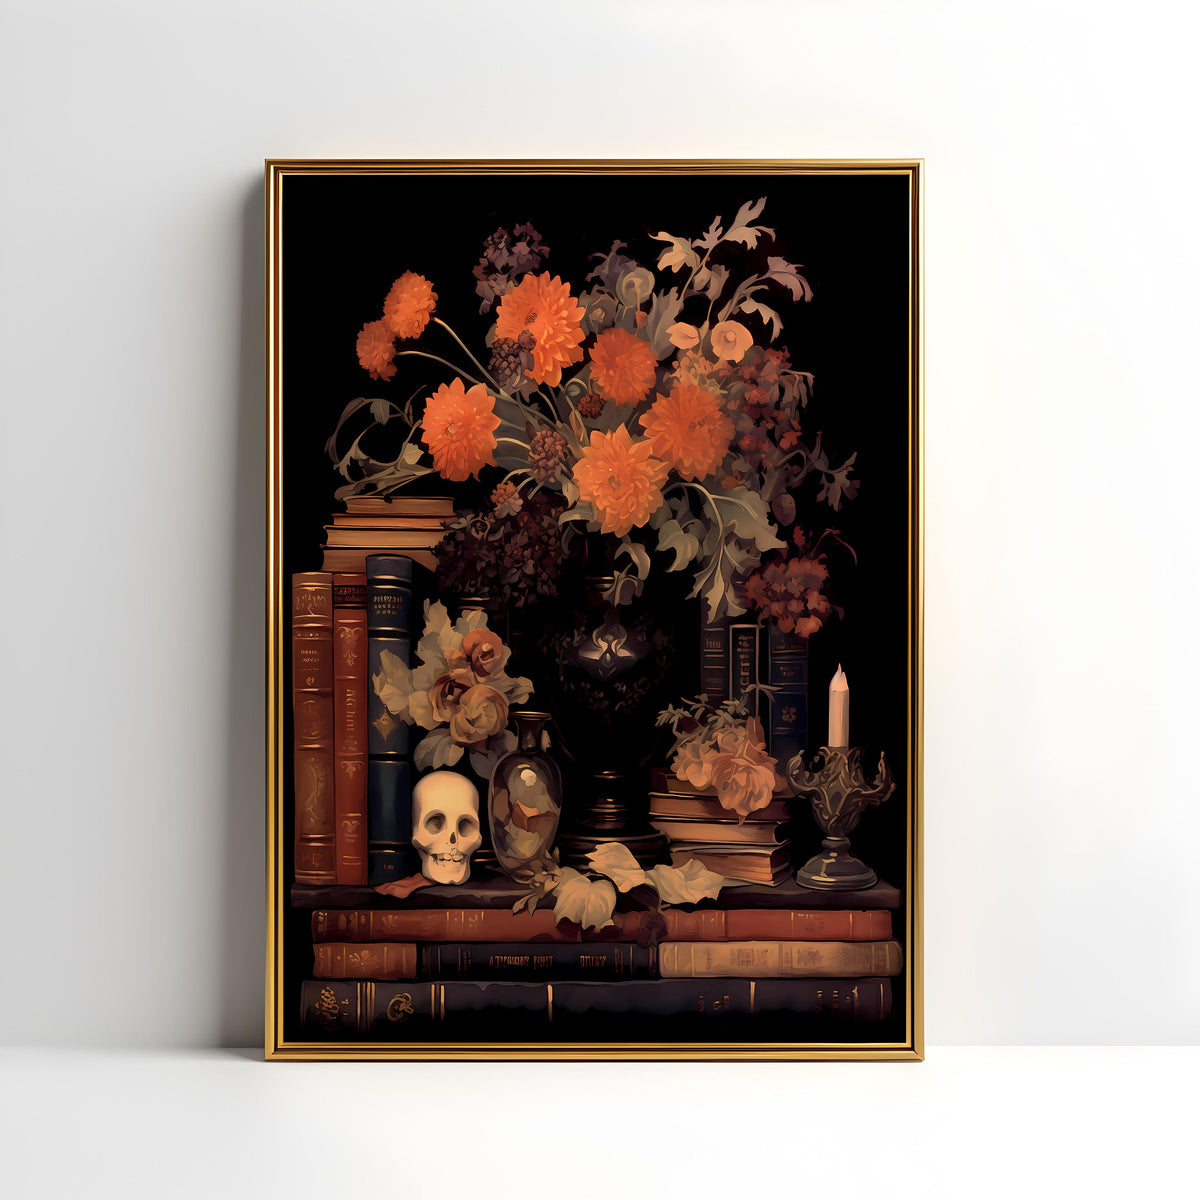 a painting of flowers and books on a shelf